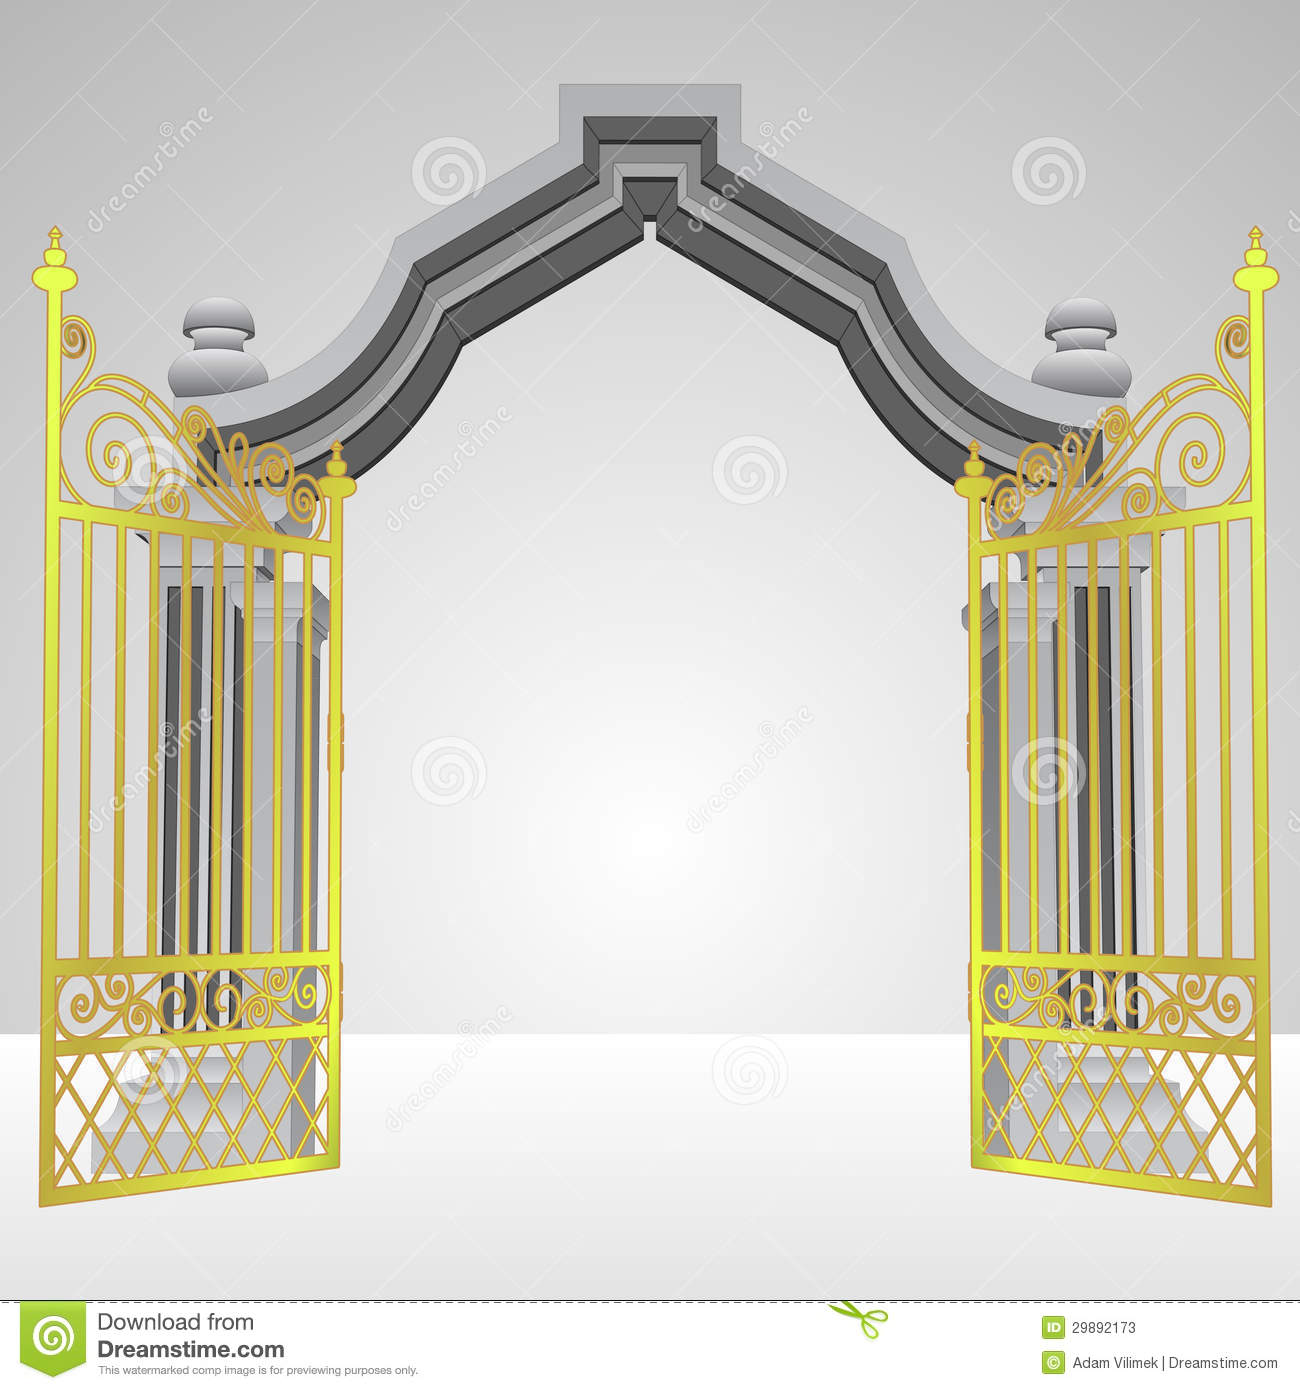 gate clipart entry gate